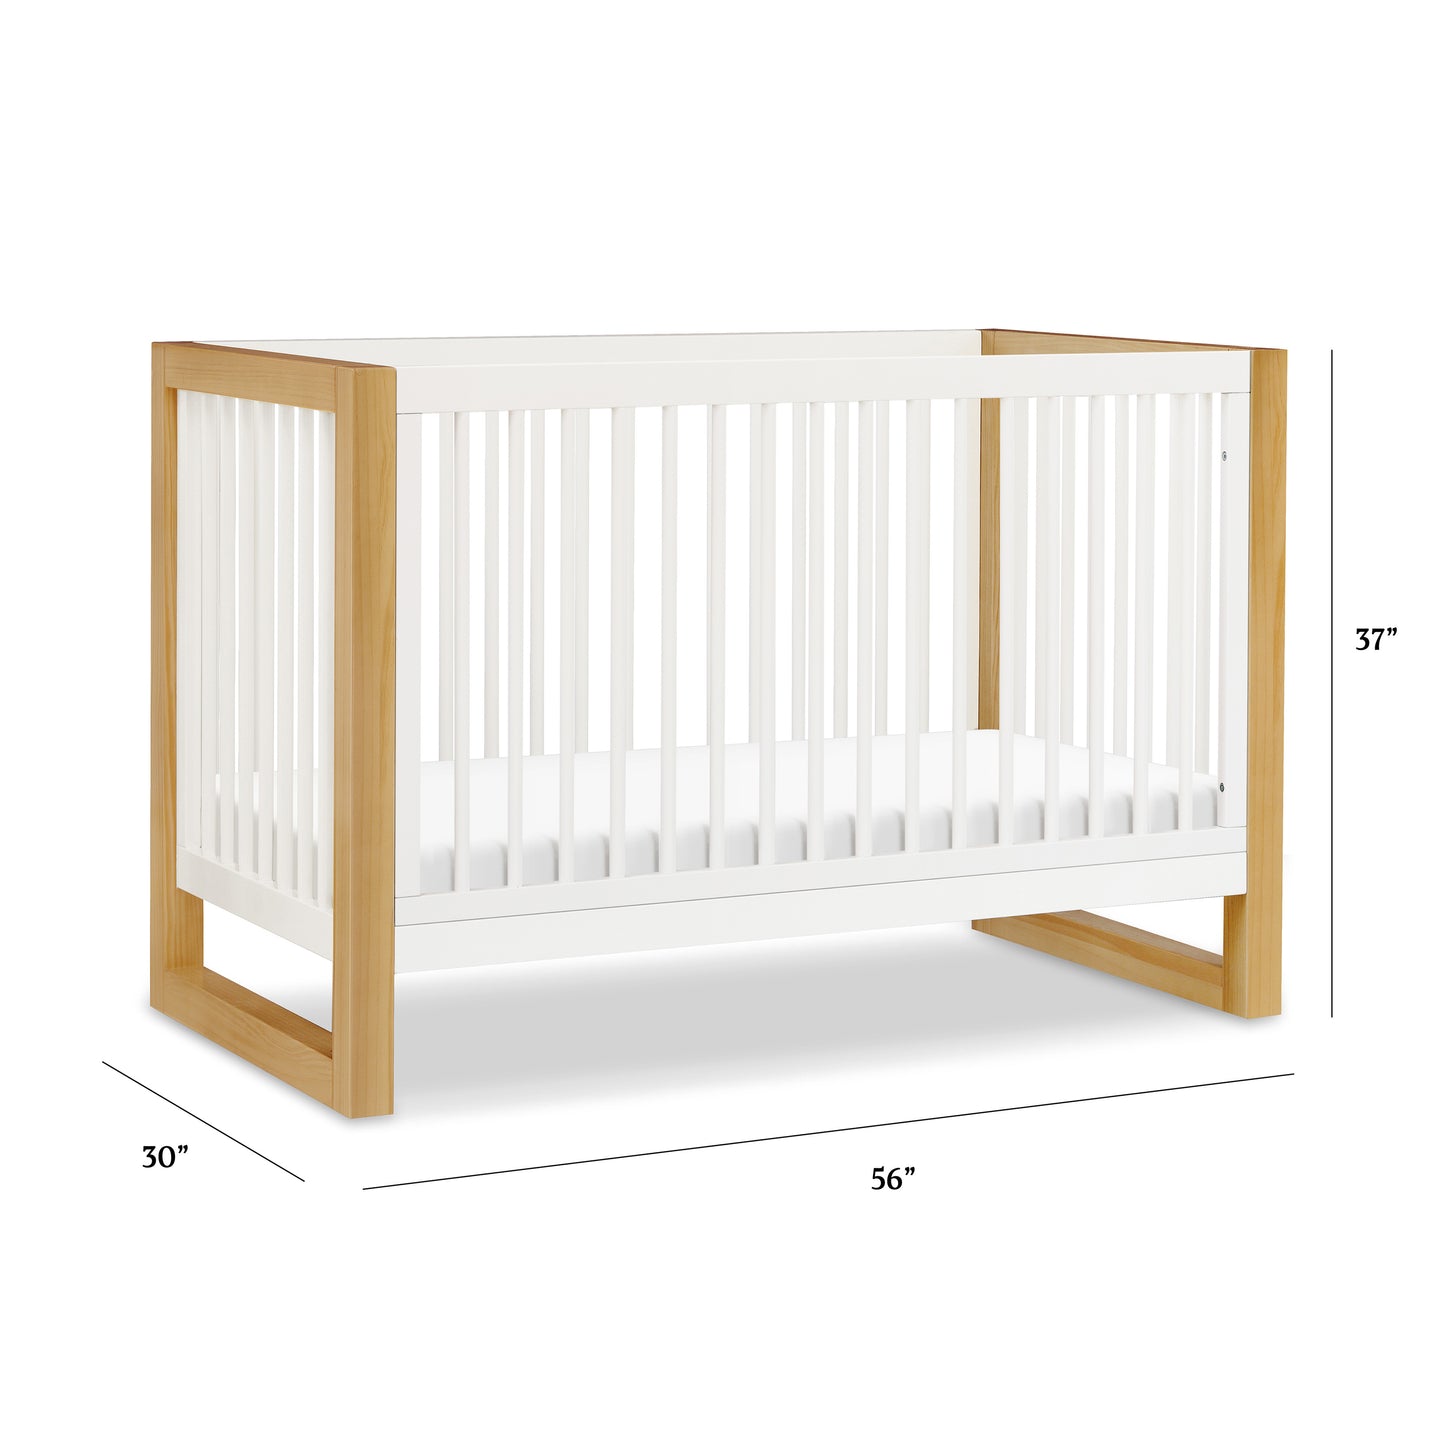 M23301RWHY,Nantucket 3-in-1 Convertible Crib w/Toddler Bed Conversion Kit in Warm White/Honey